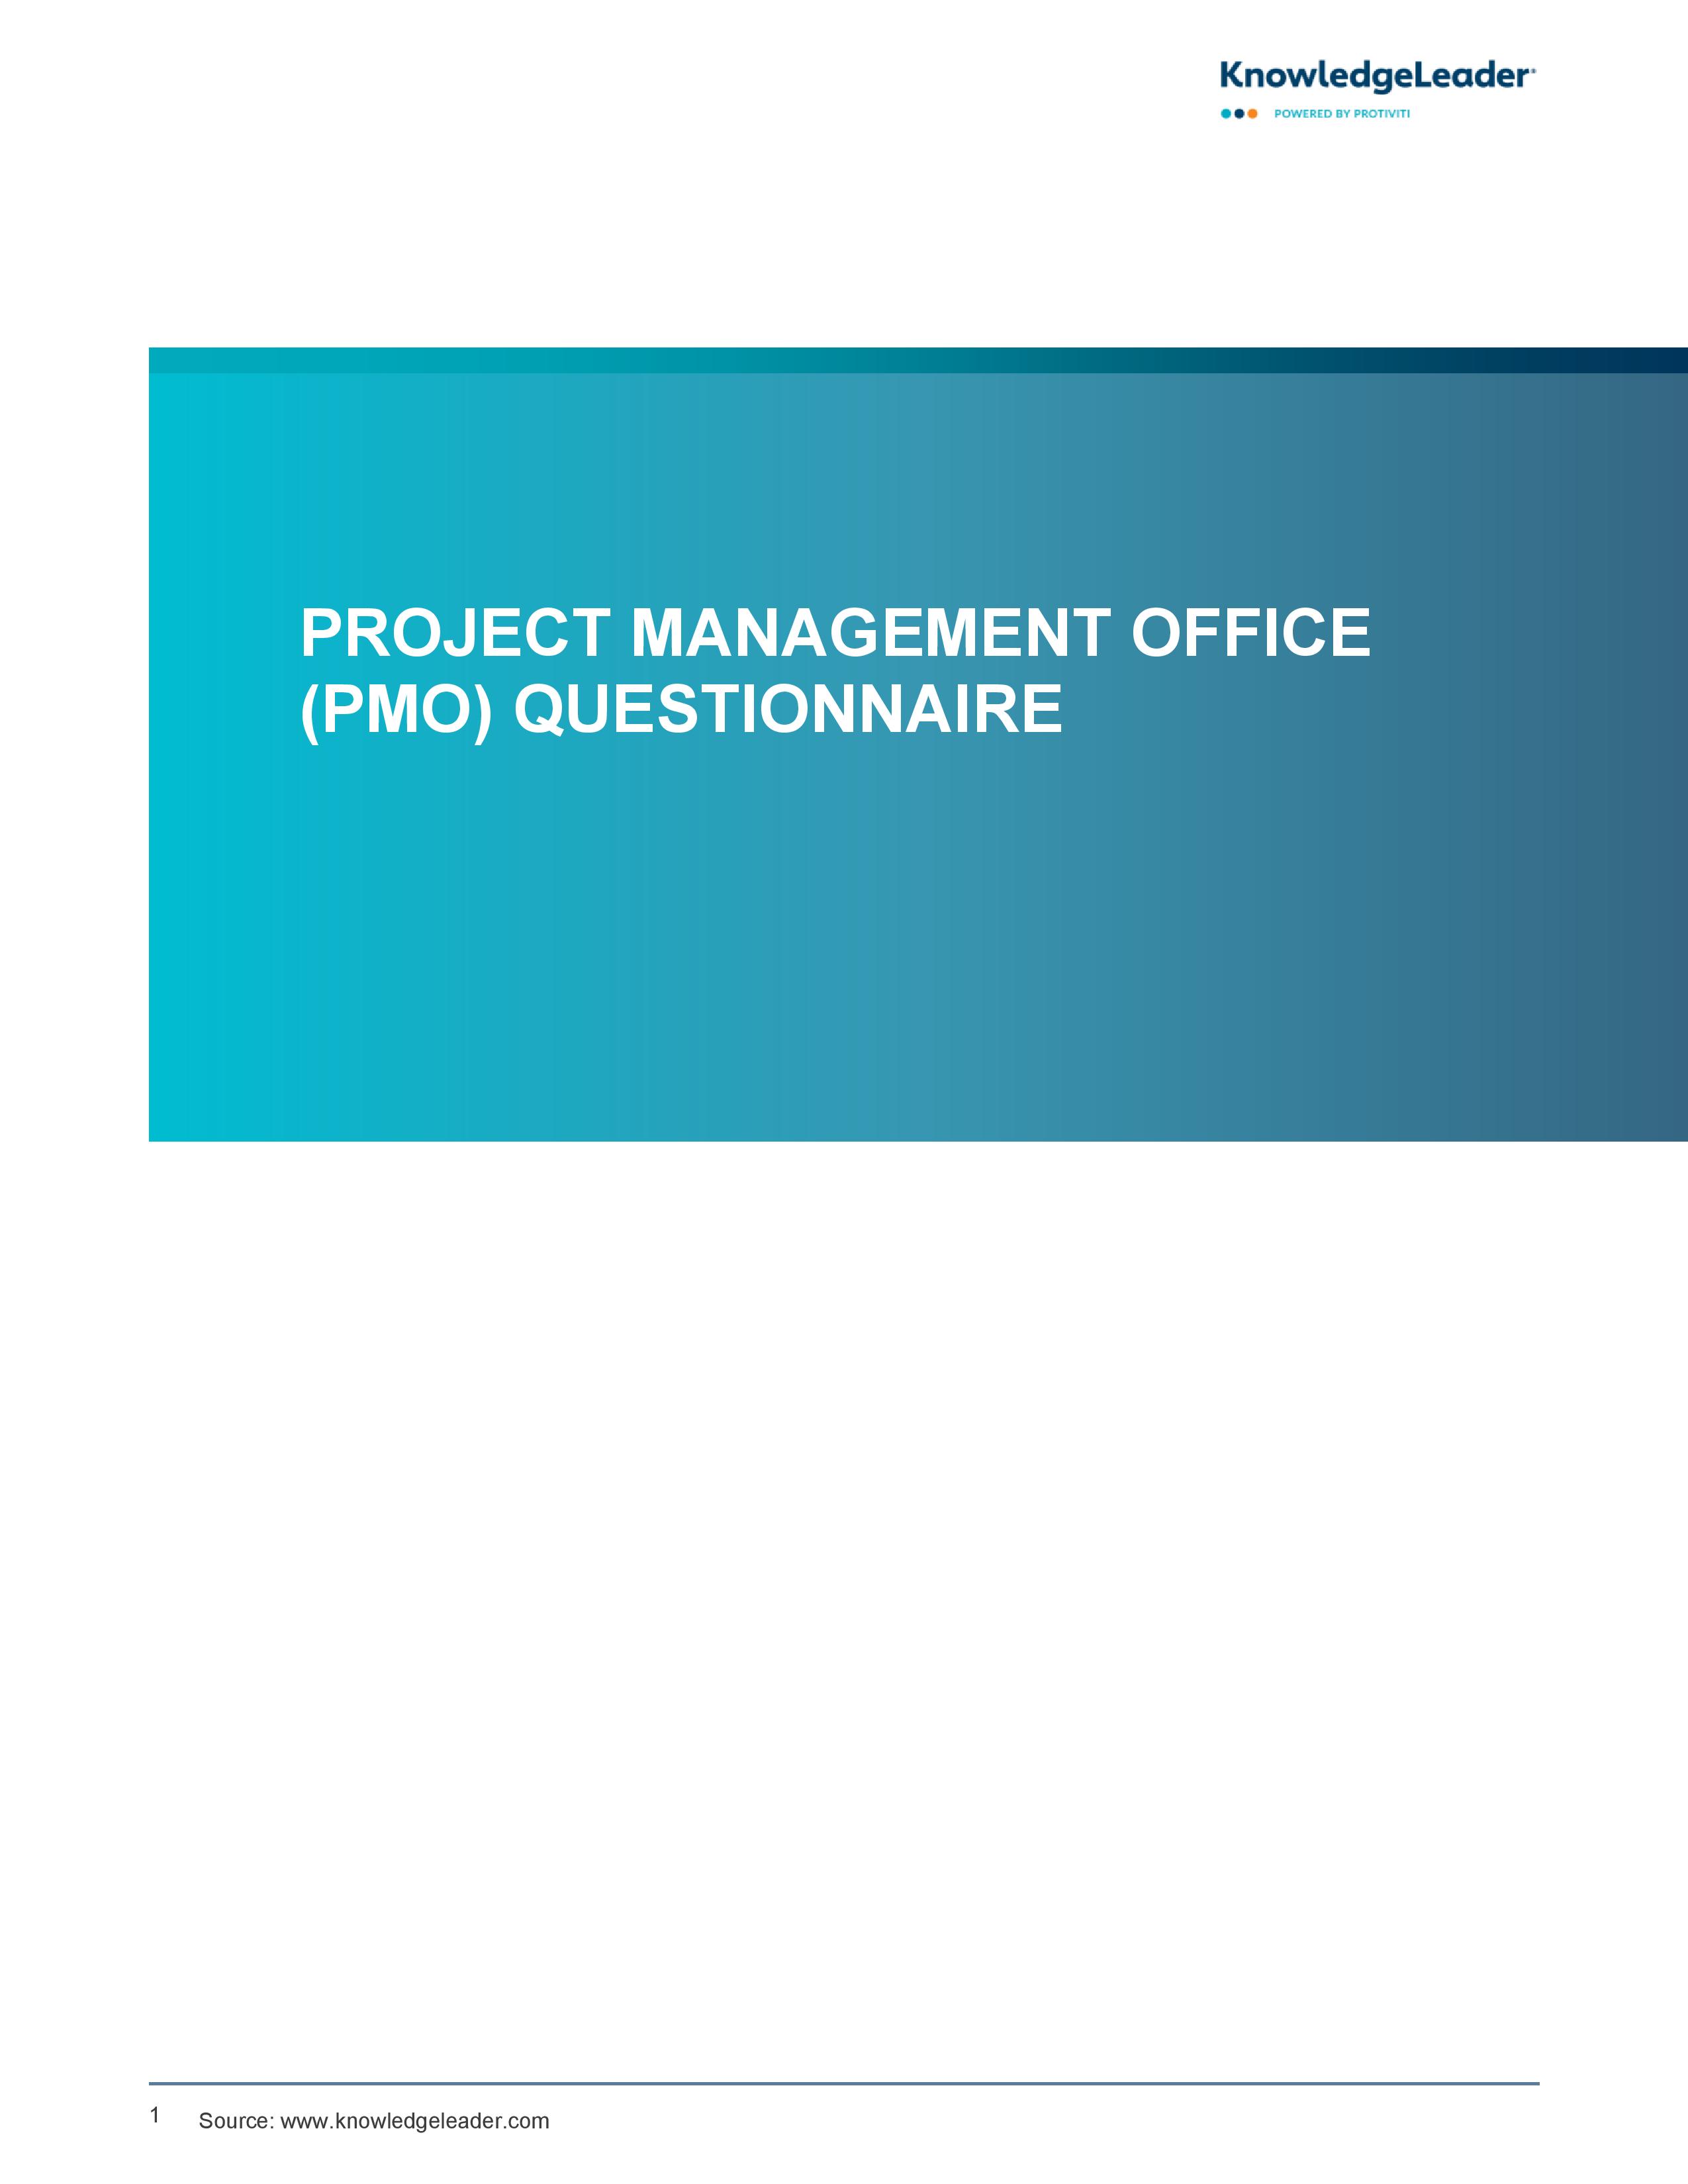  screenshot of the first page of Project Management Office (PMO) Questionnaire